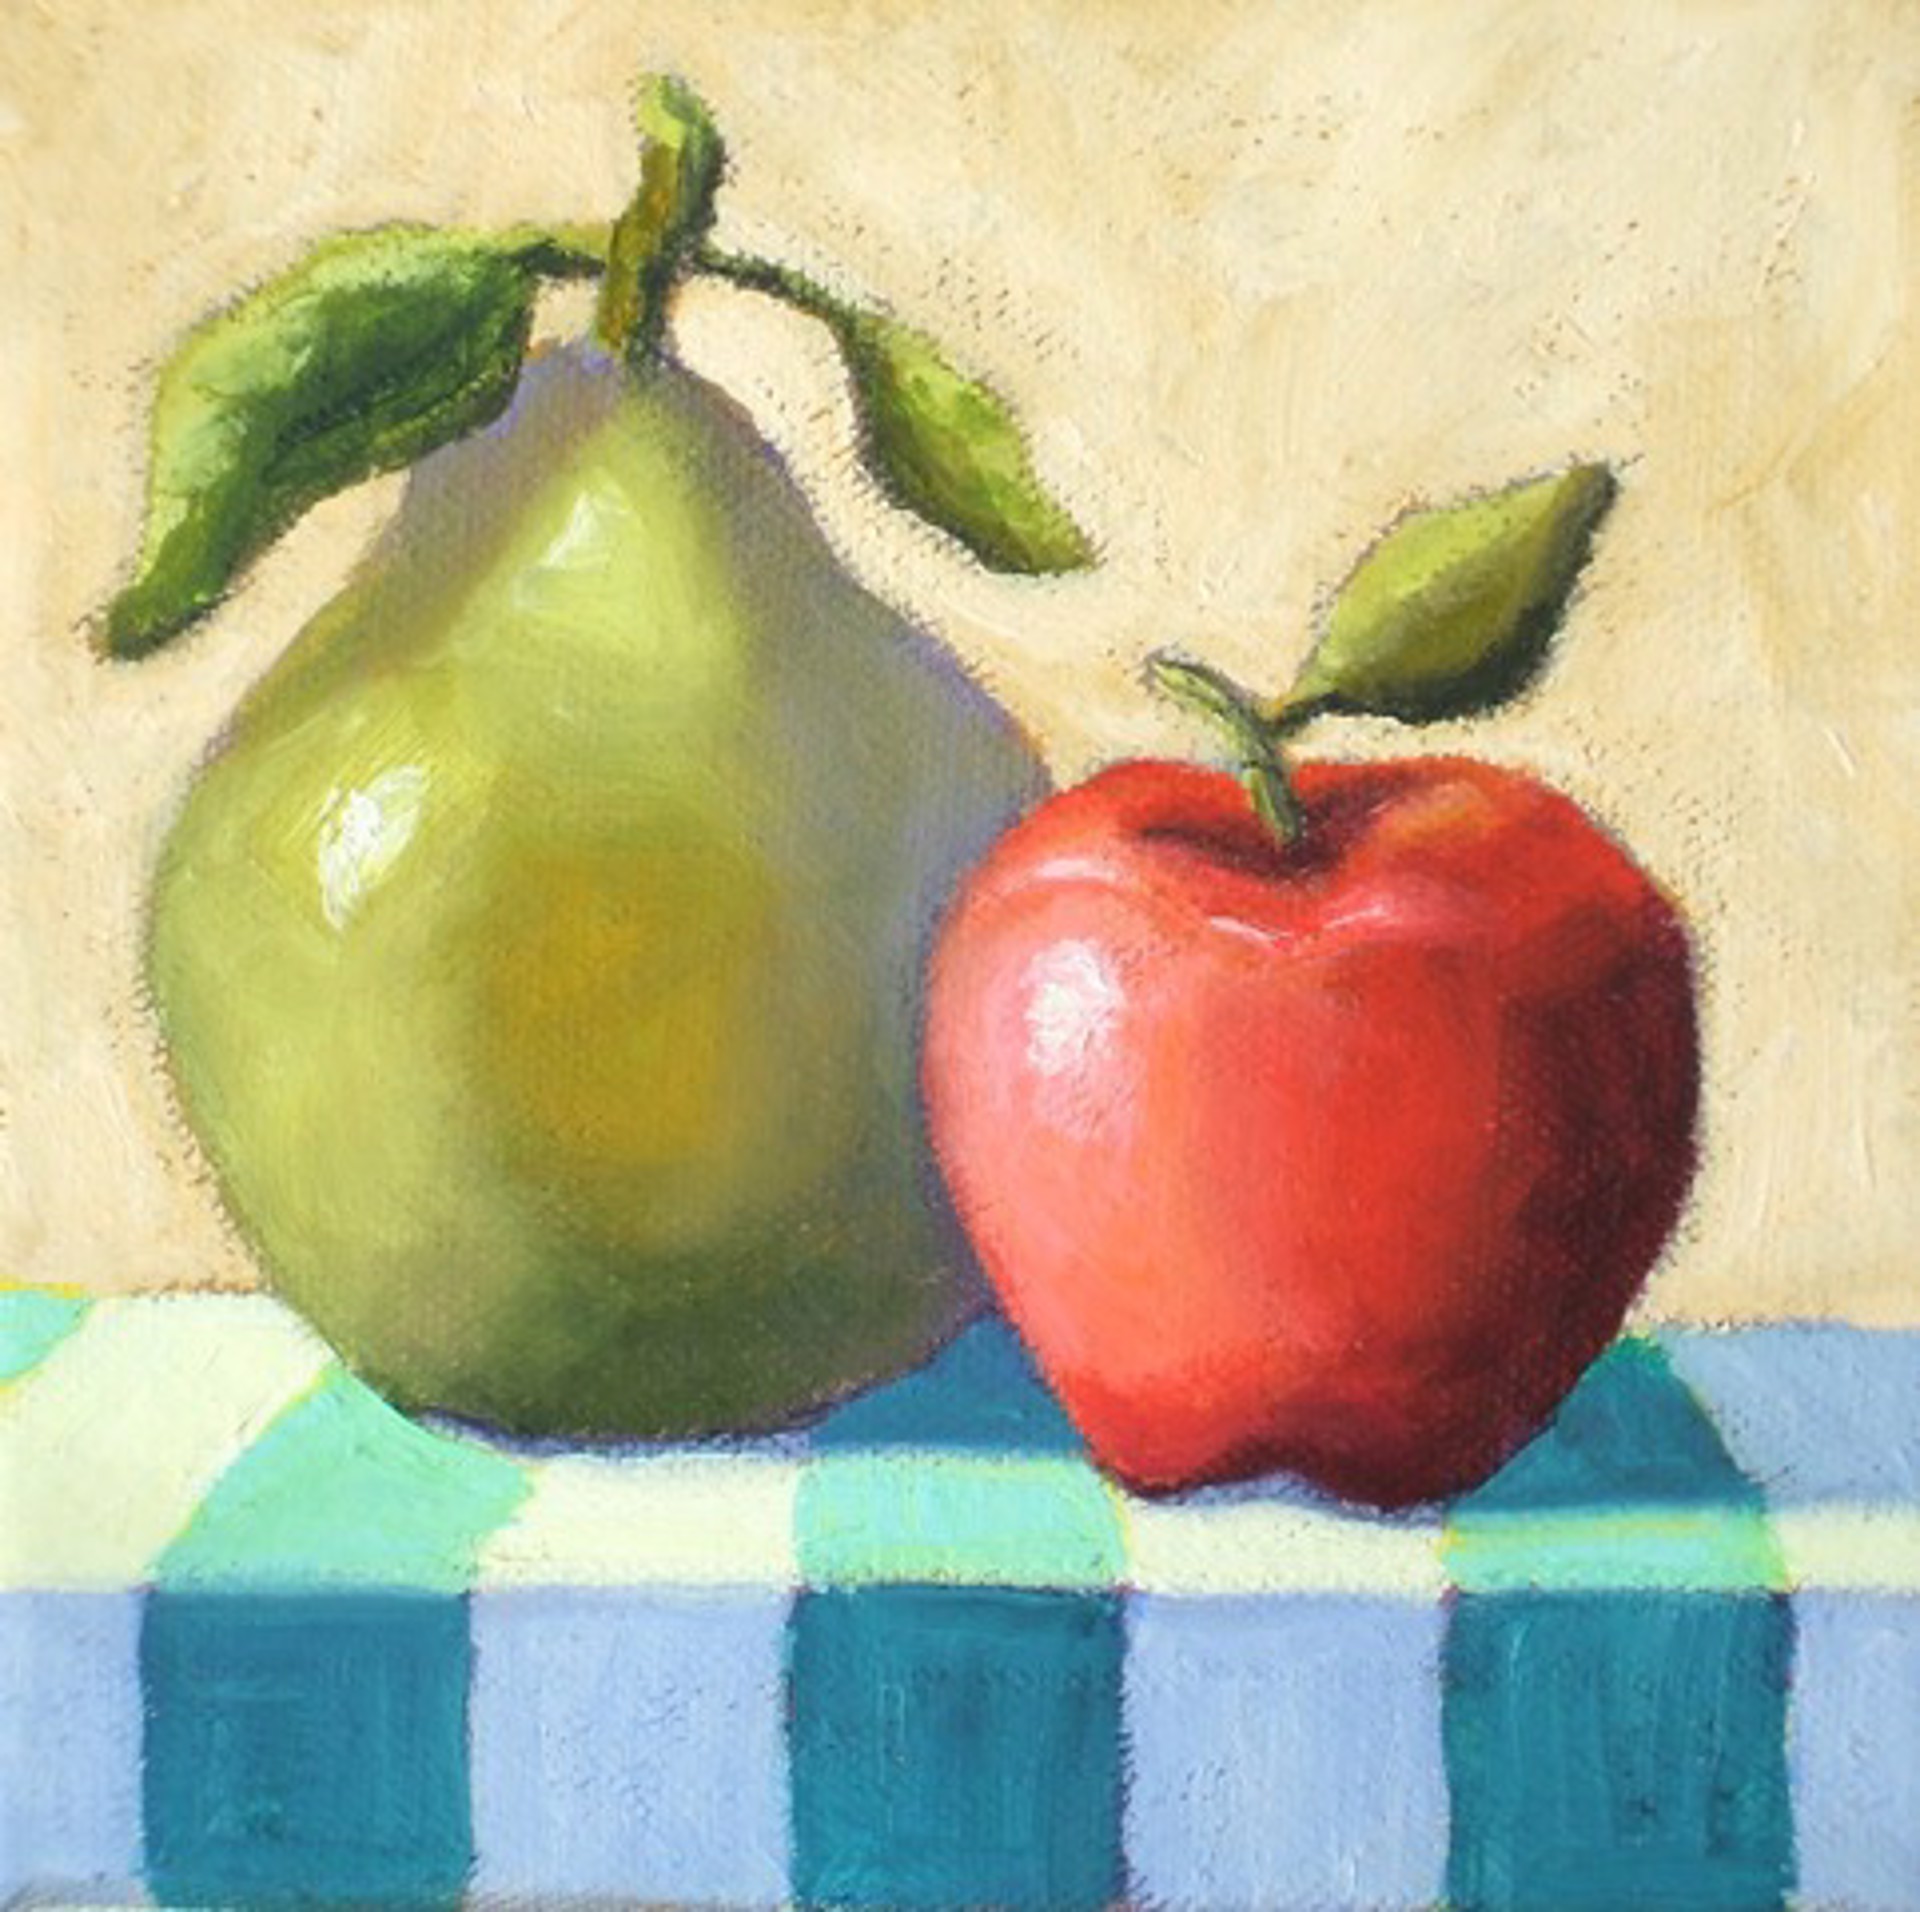 Apple and Pear by Pat Doherty